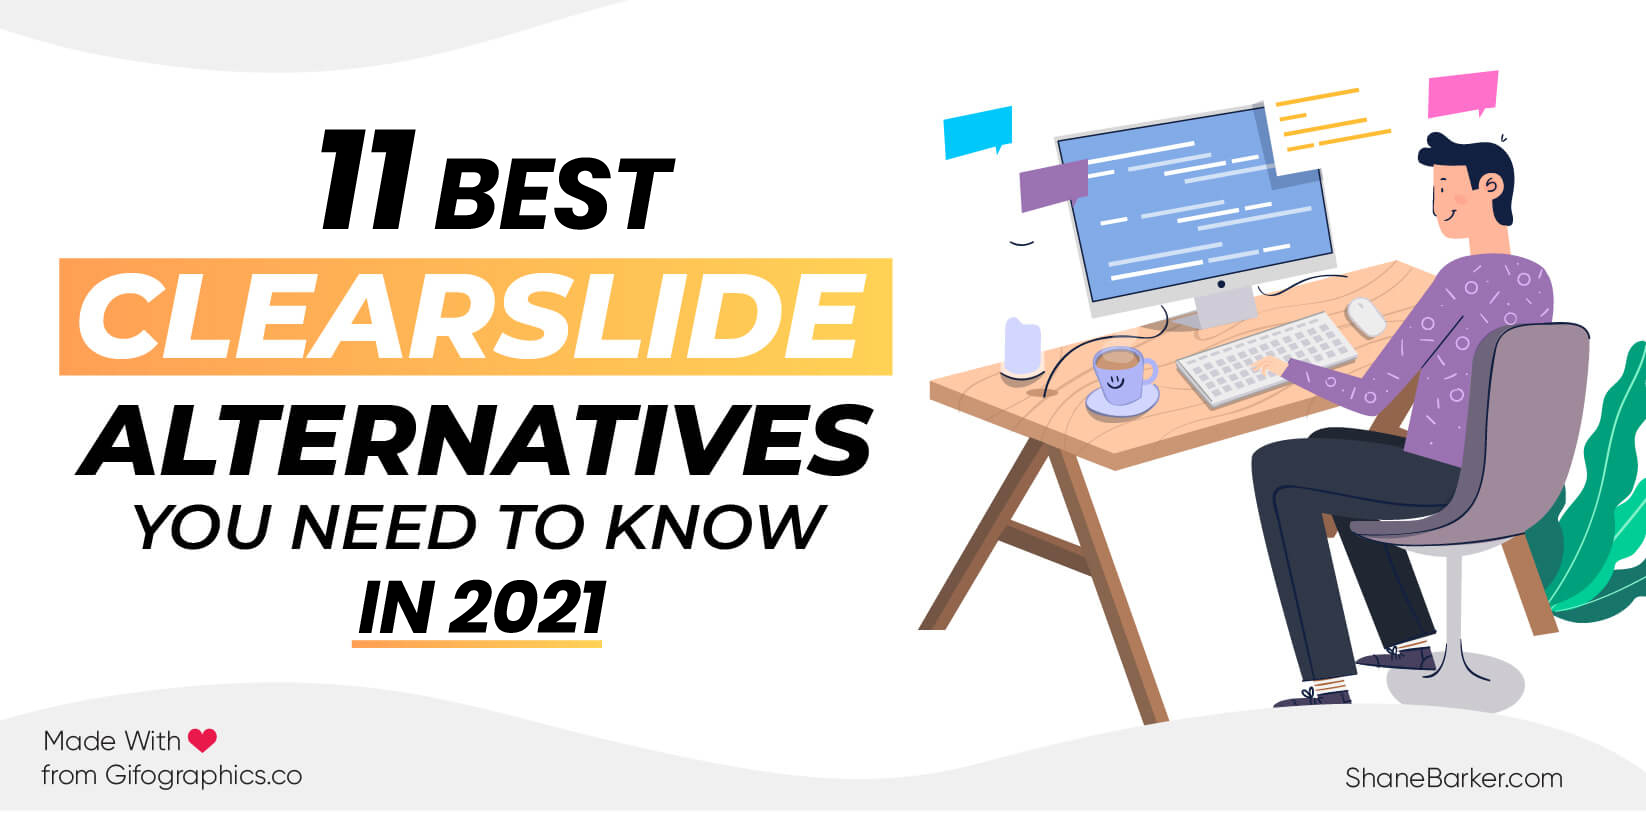 No ClearSlide Free Download? Here’s the Best ClearSlide Alternatives